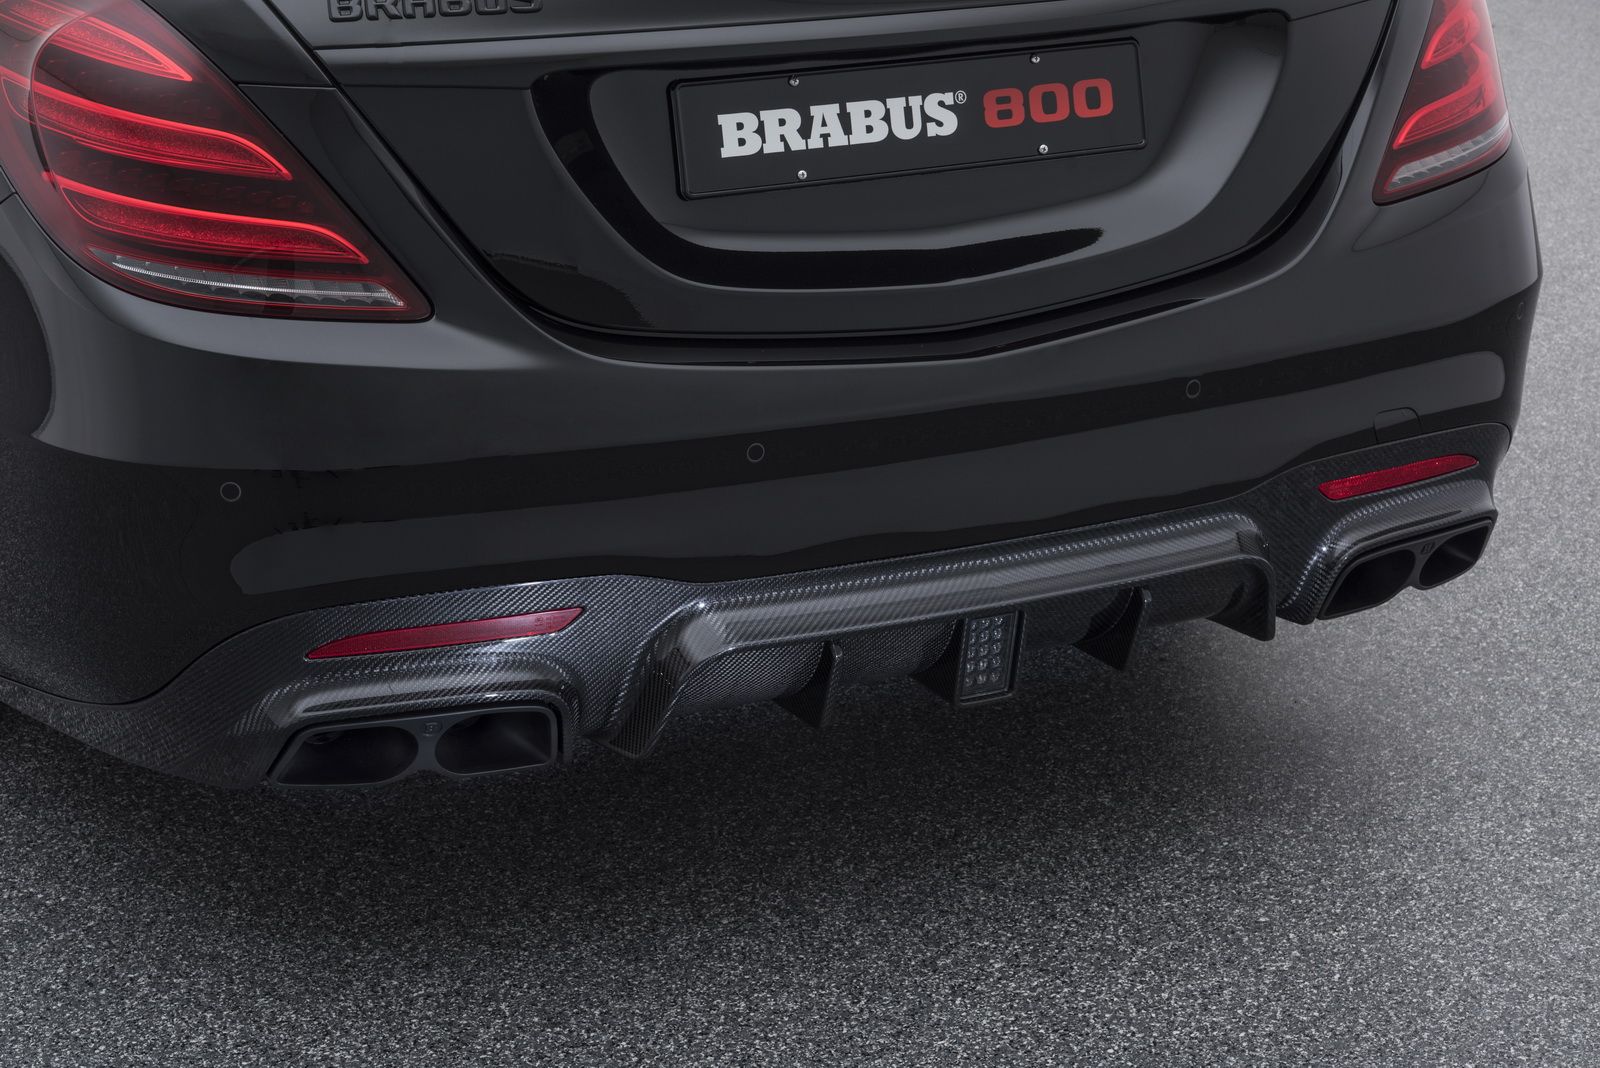 The Brabus 800 Takes the Mercedes-AMG S63 to the Extreme